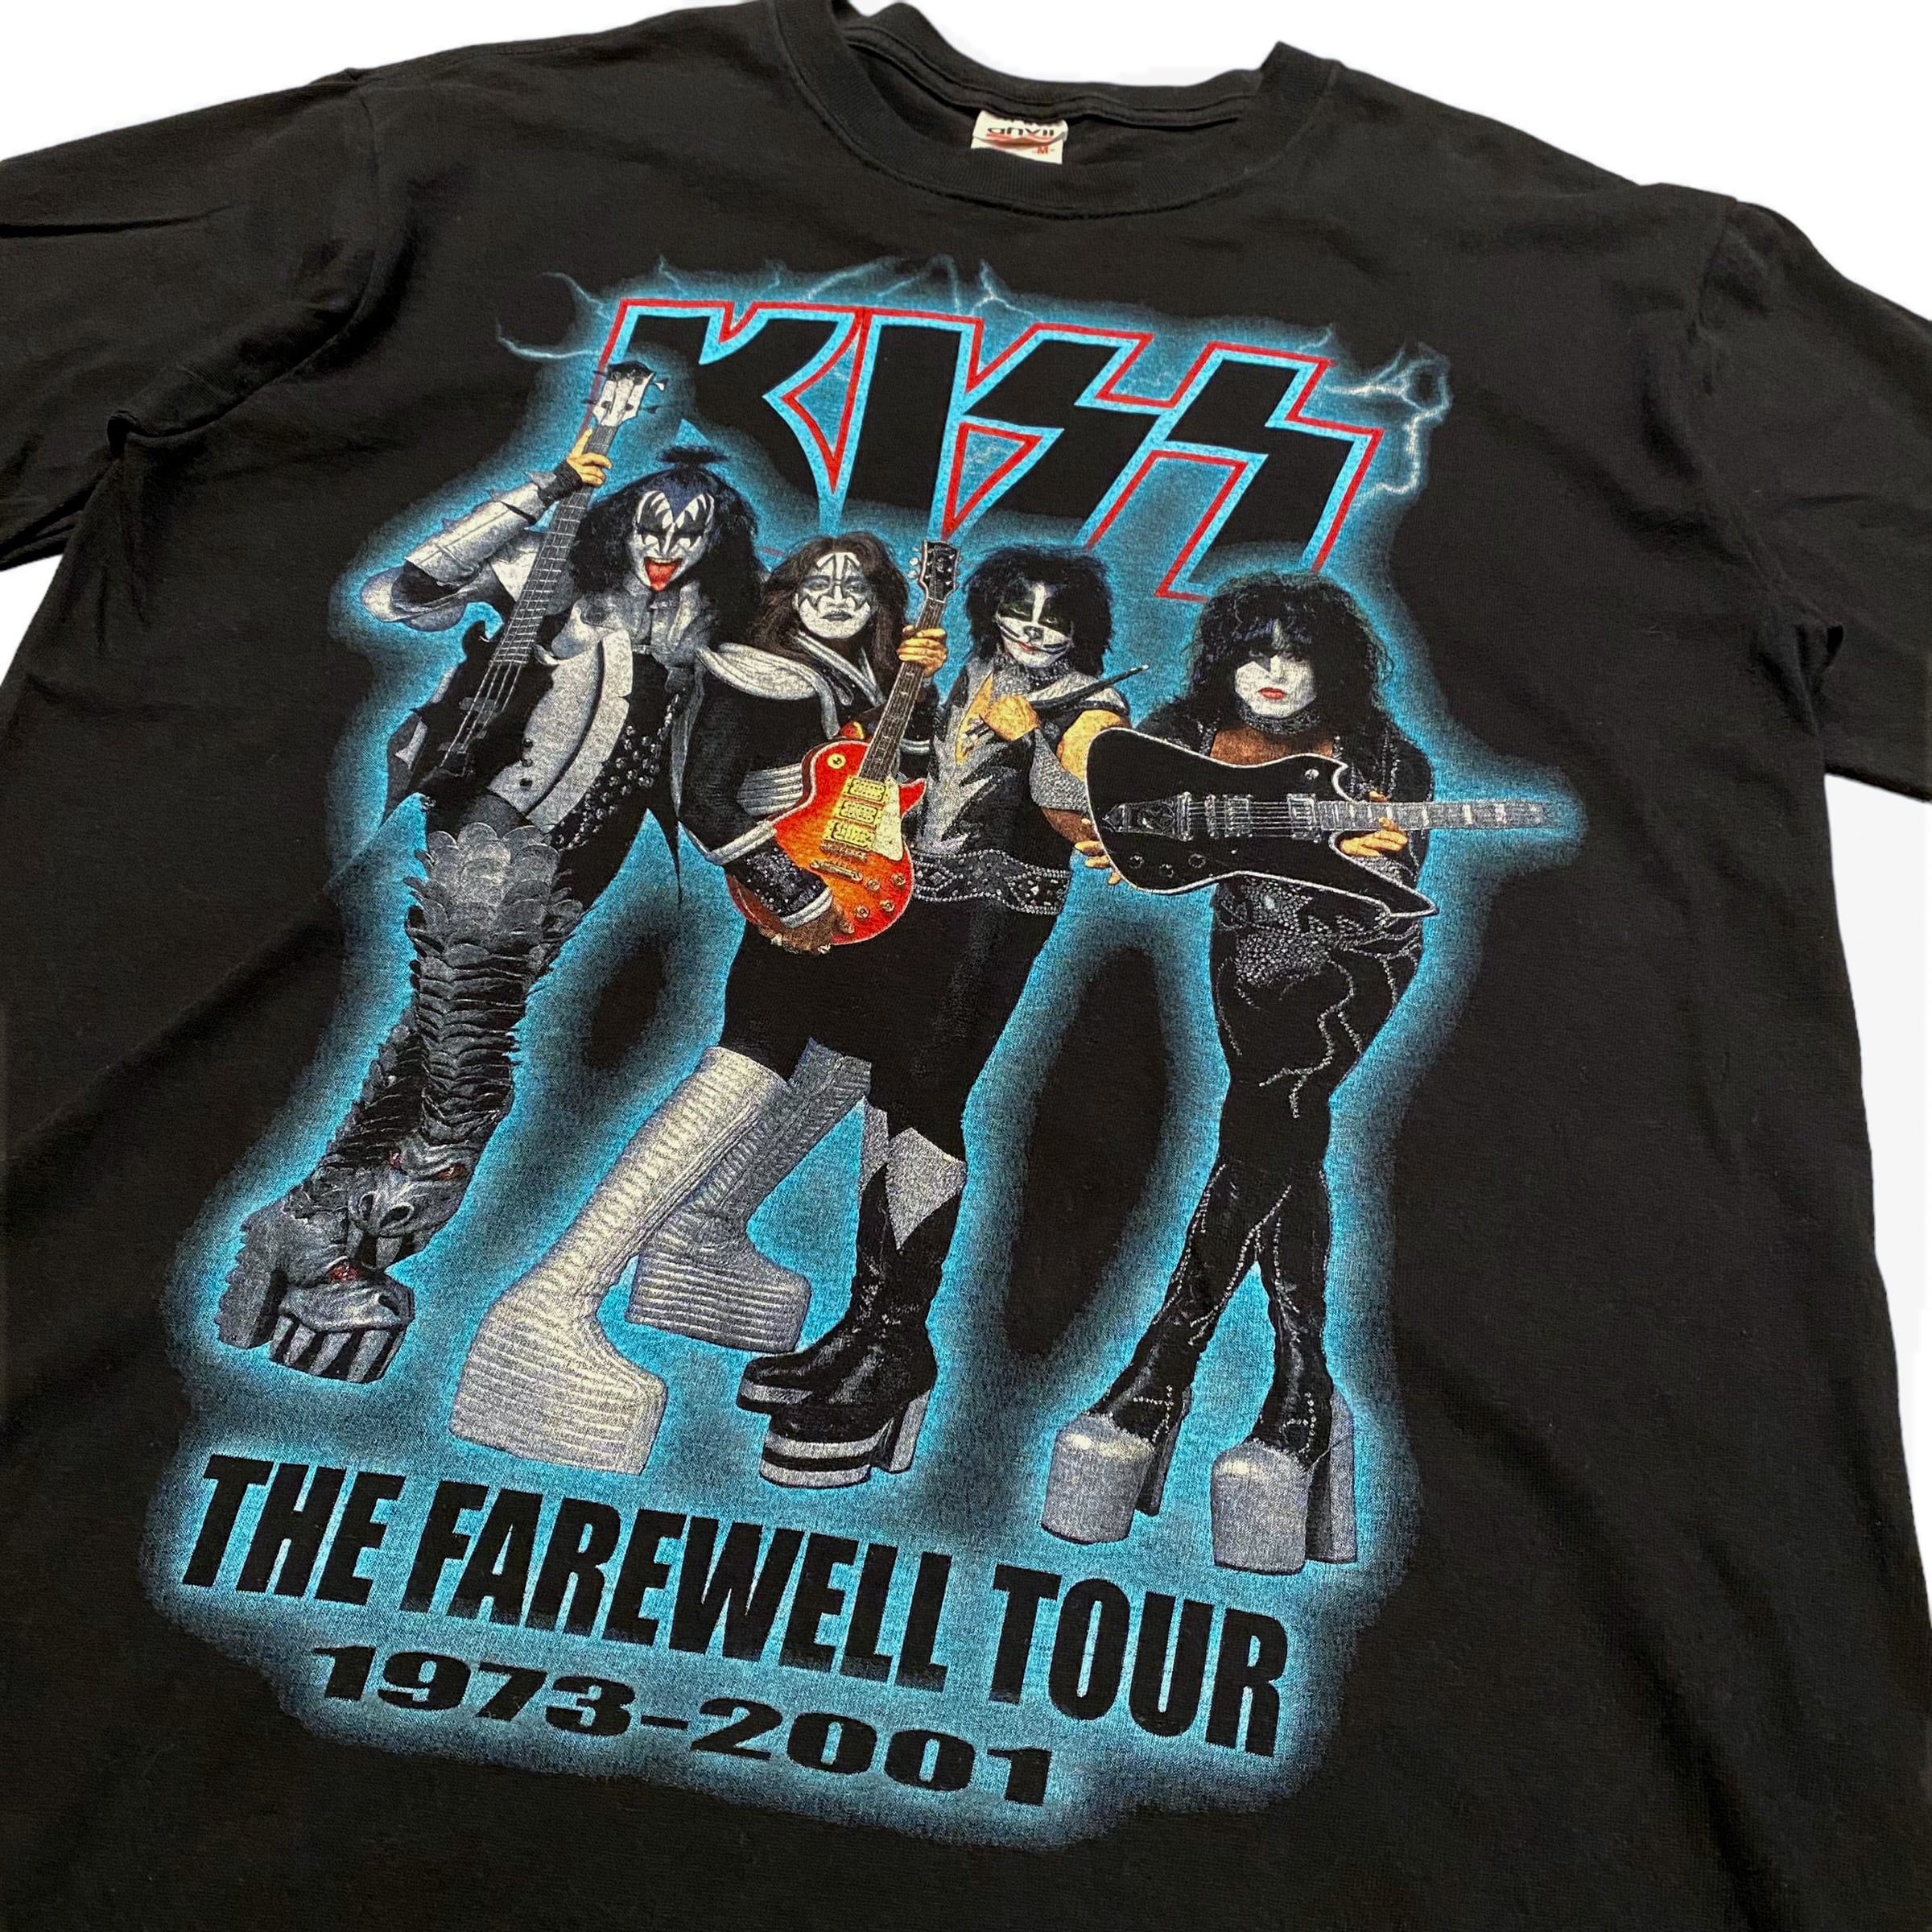 00's KISS THE FAREWELL TOUR Band T-Shirt M / キッス バンドTシャツ バンT 古着 ヴィンテージ